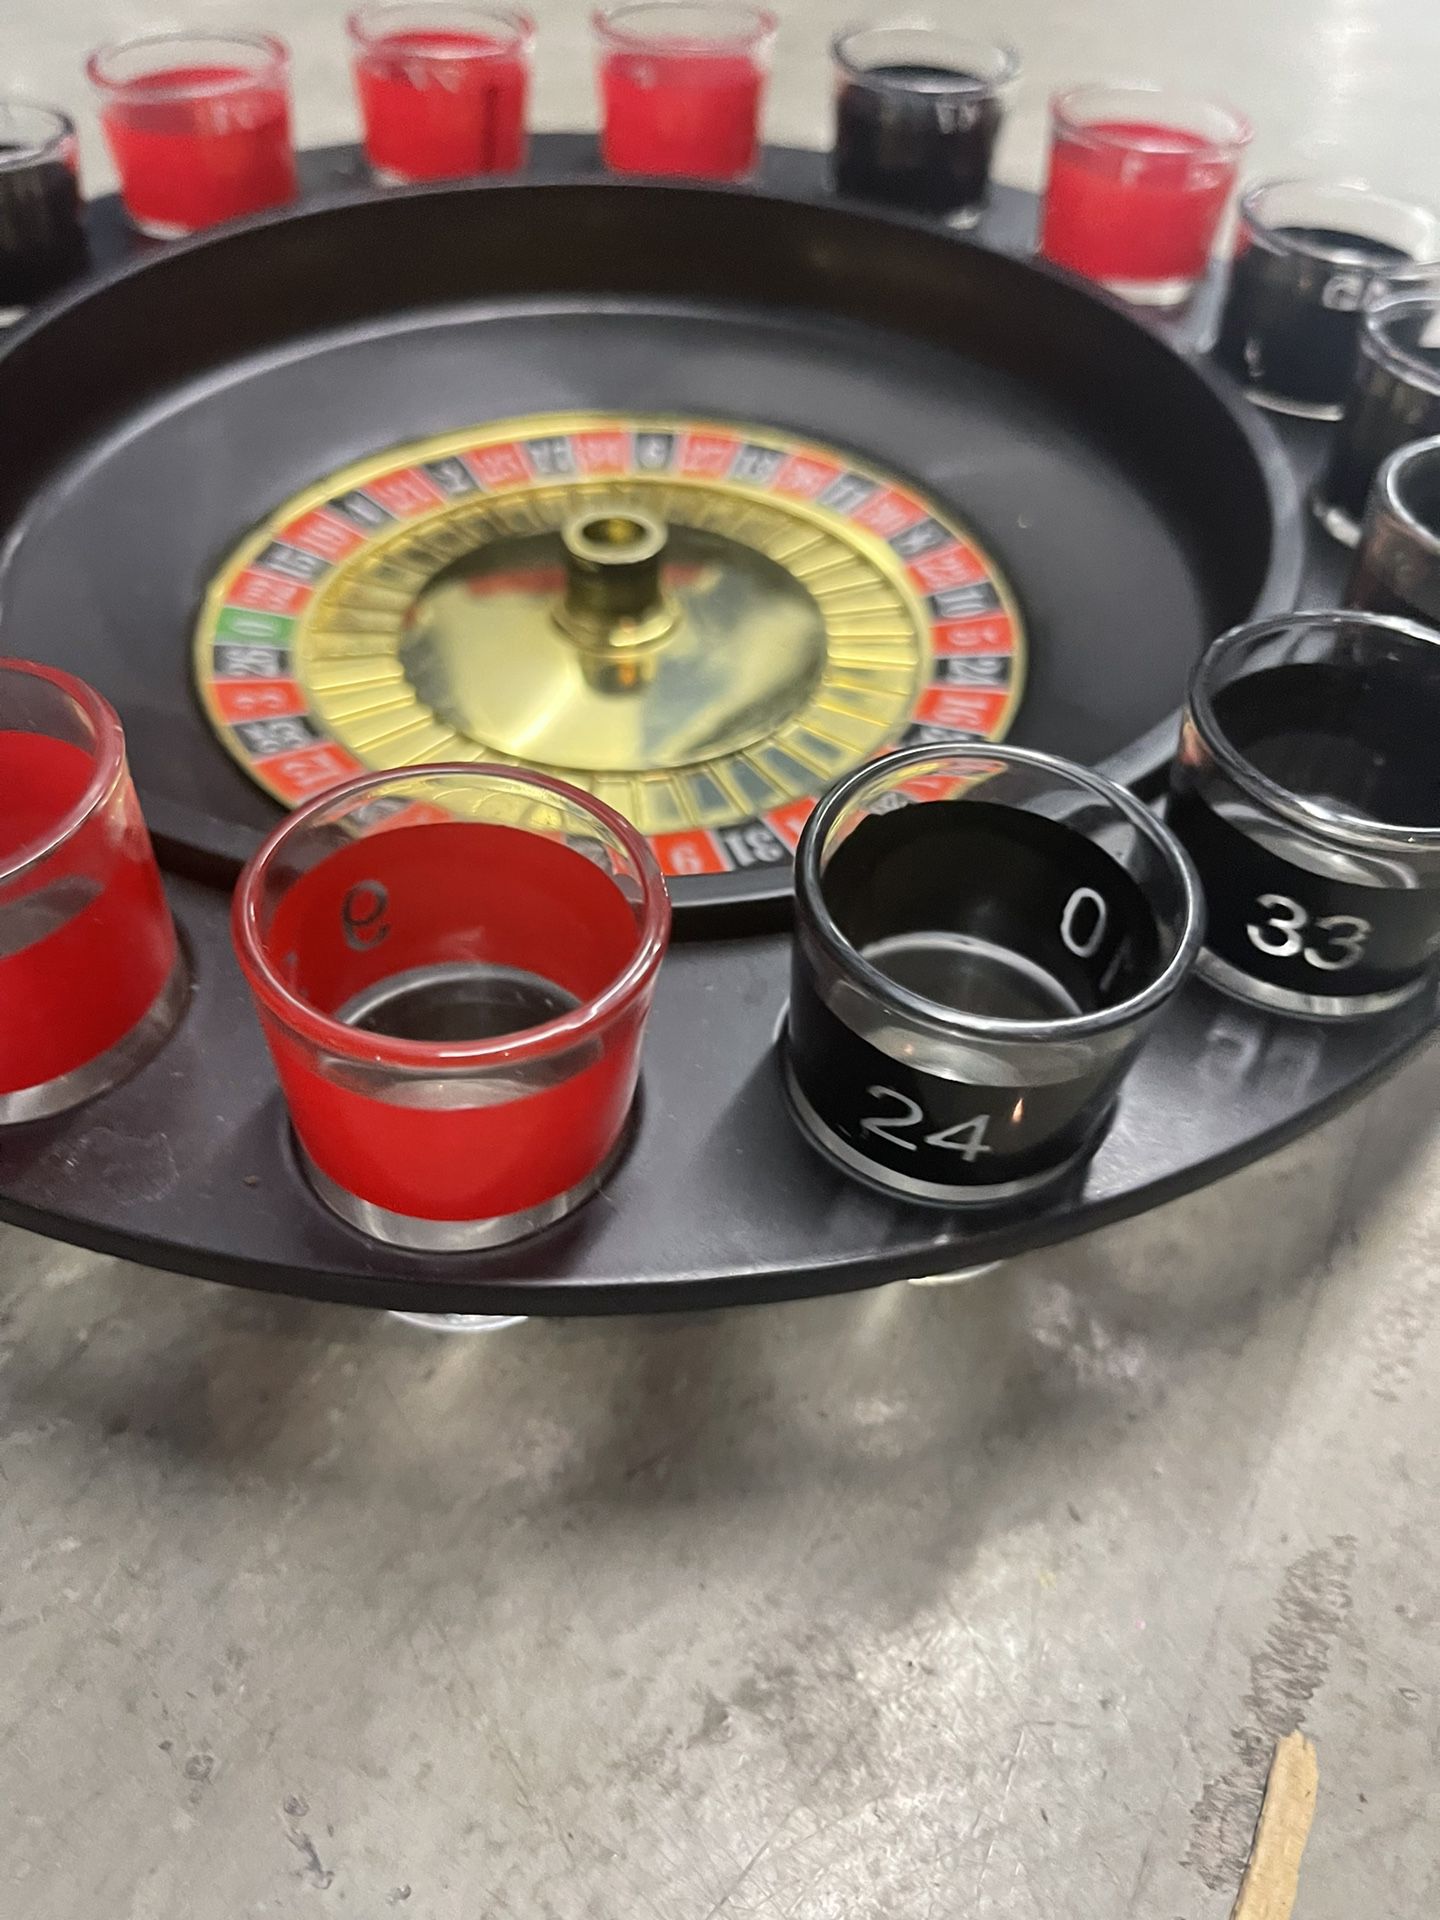 Roulette tabletop game